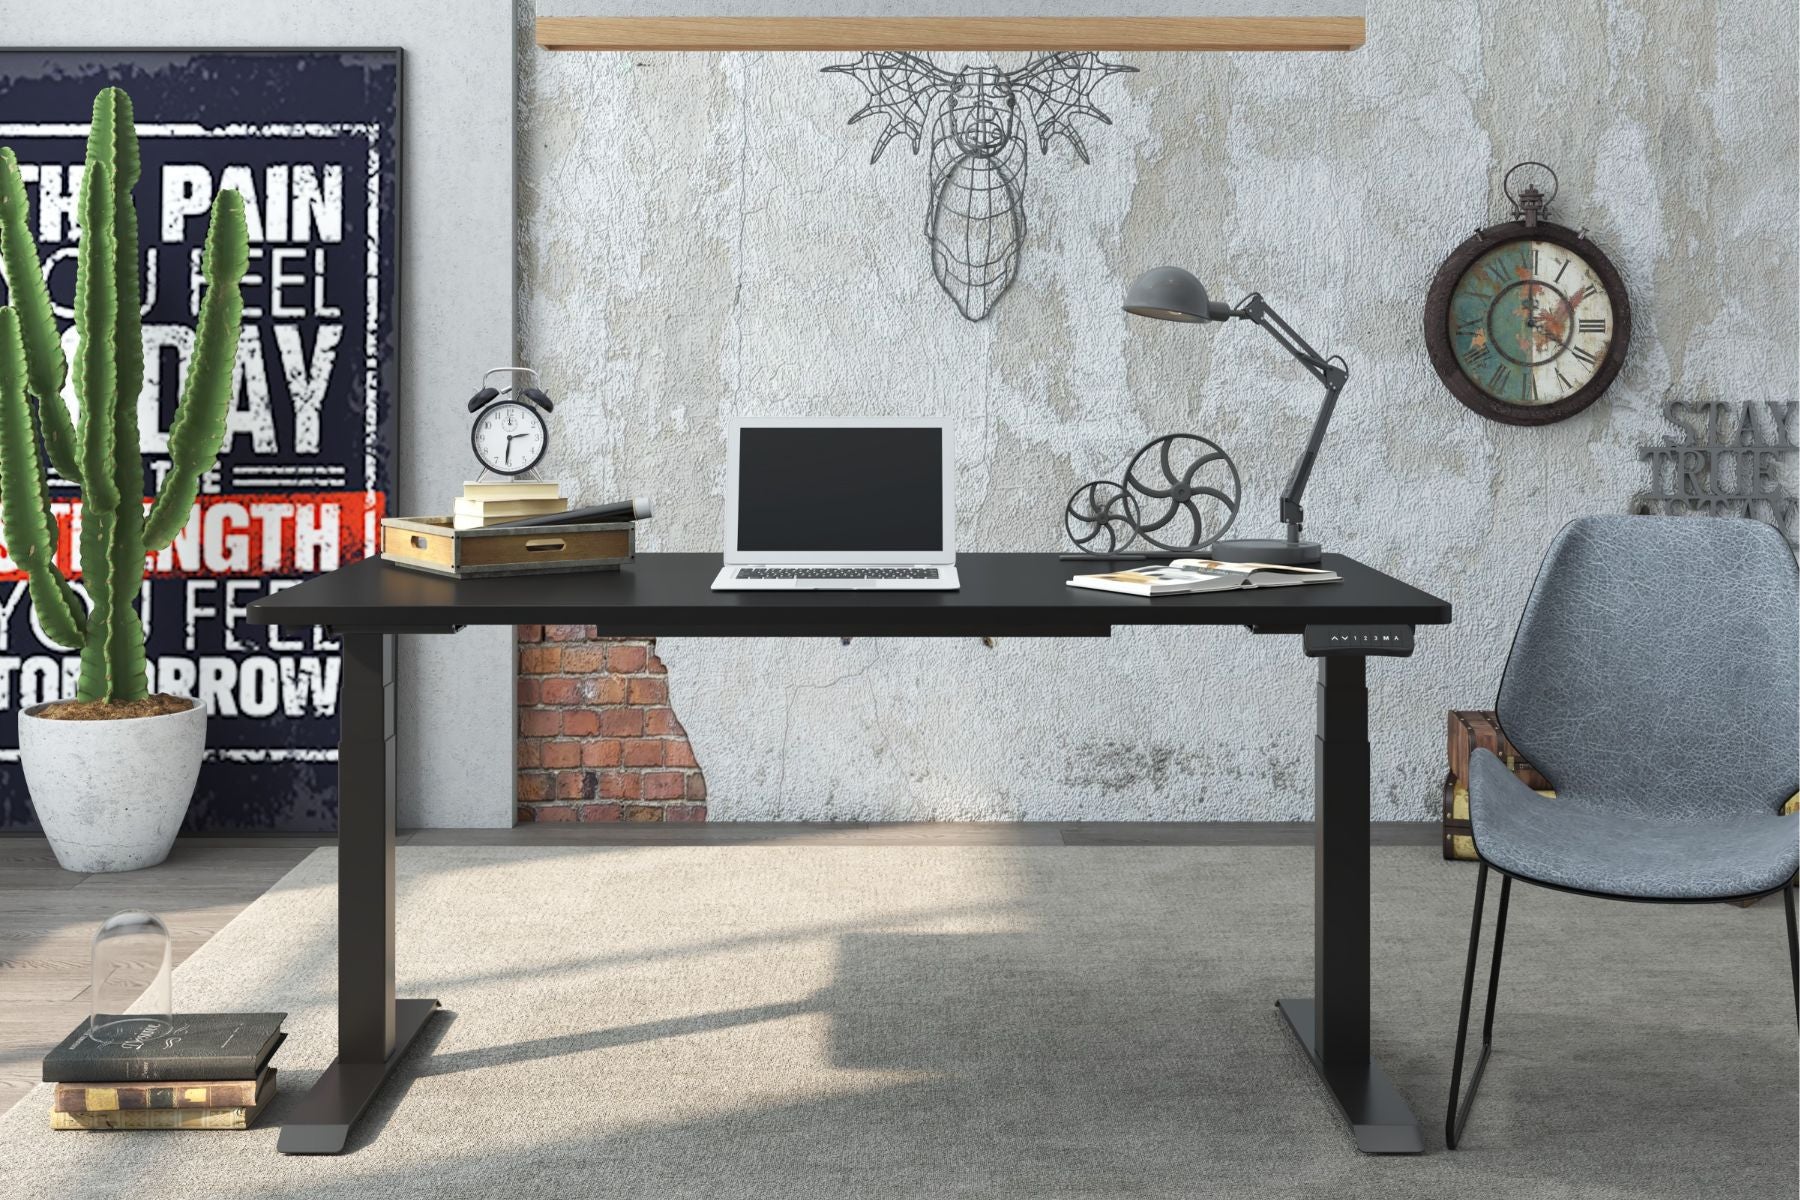 Kinetik-2 dual motor sit stand desk frame in a home environment